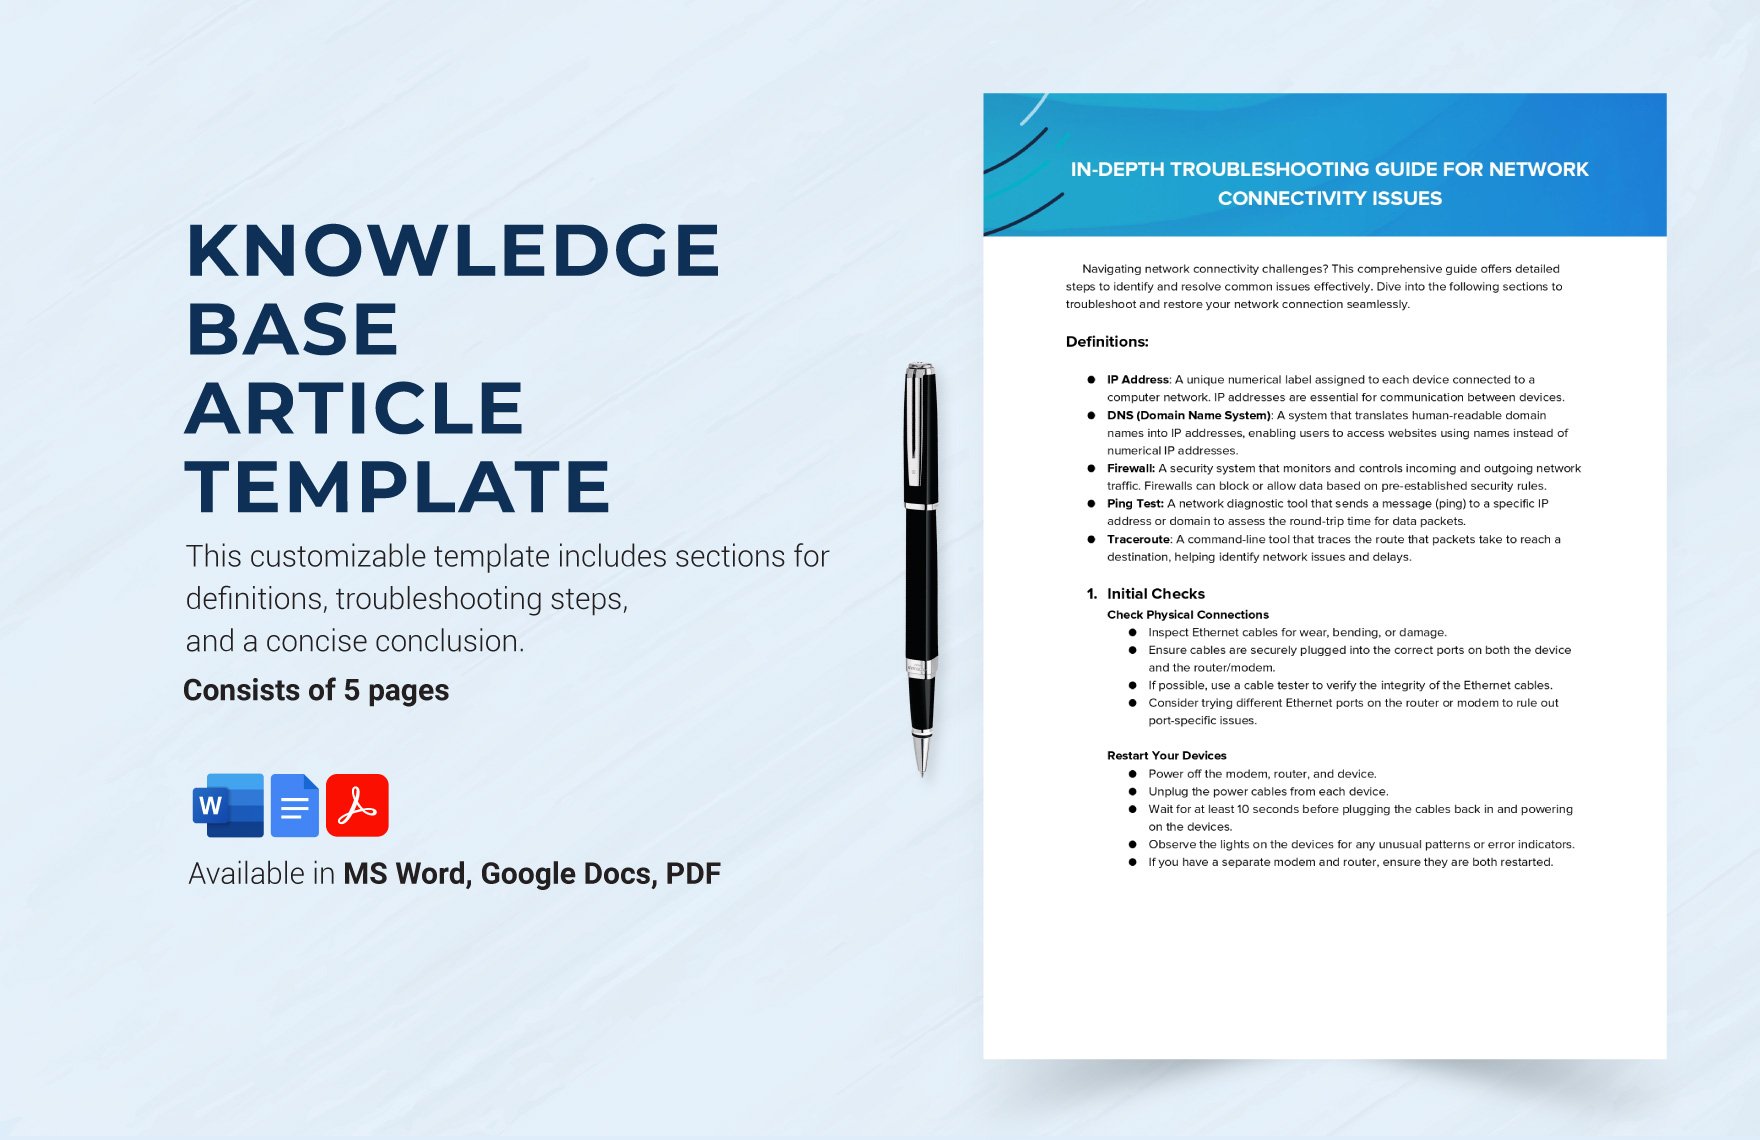 Knowledge Base Article Template